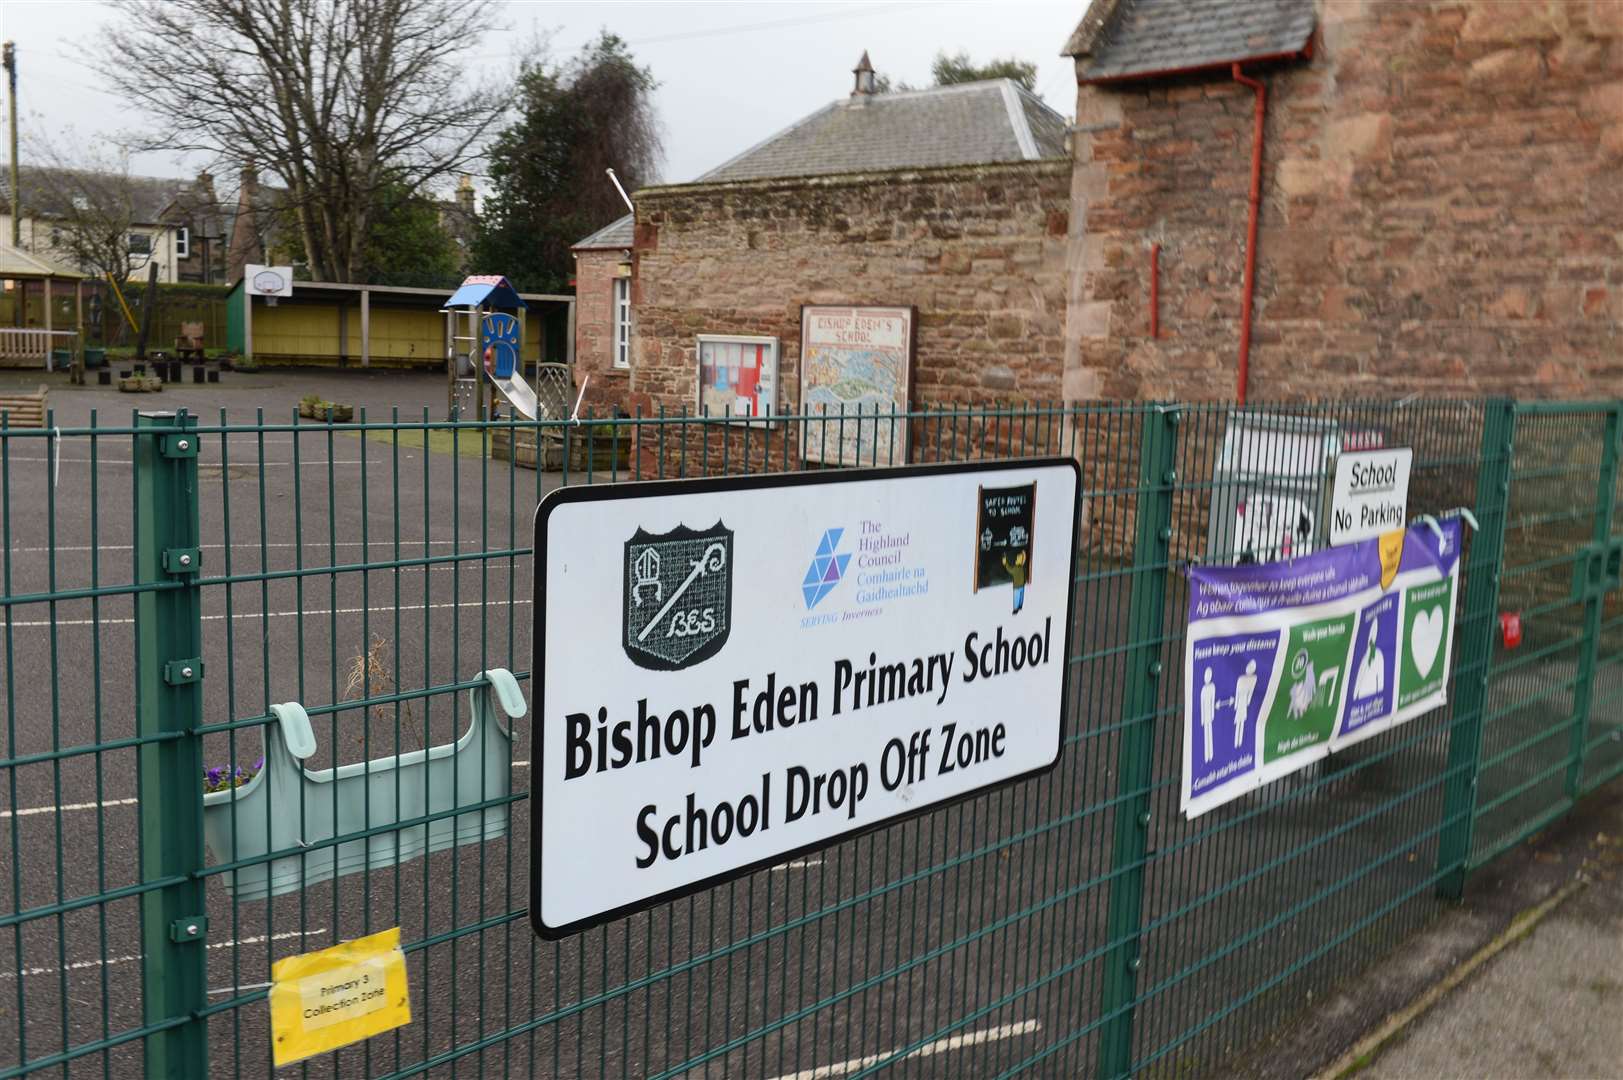 Bishop Eden Primary School shut early for Christmas after a Covid case was confirmed there.